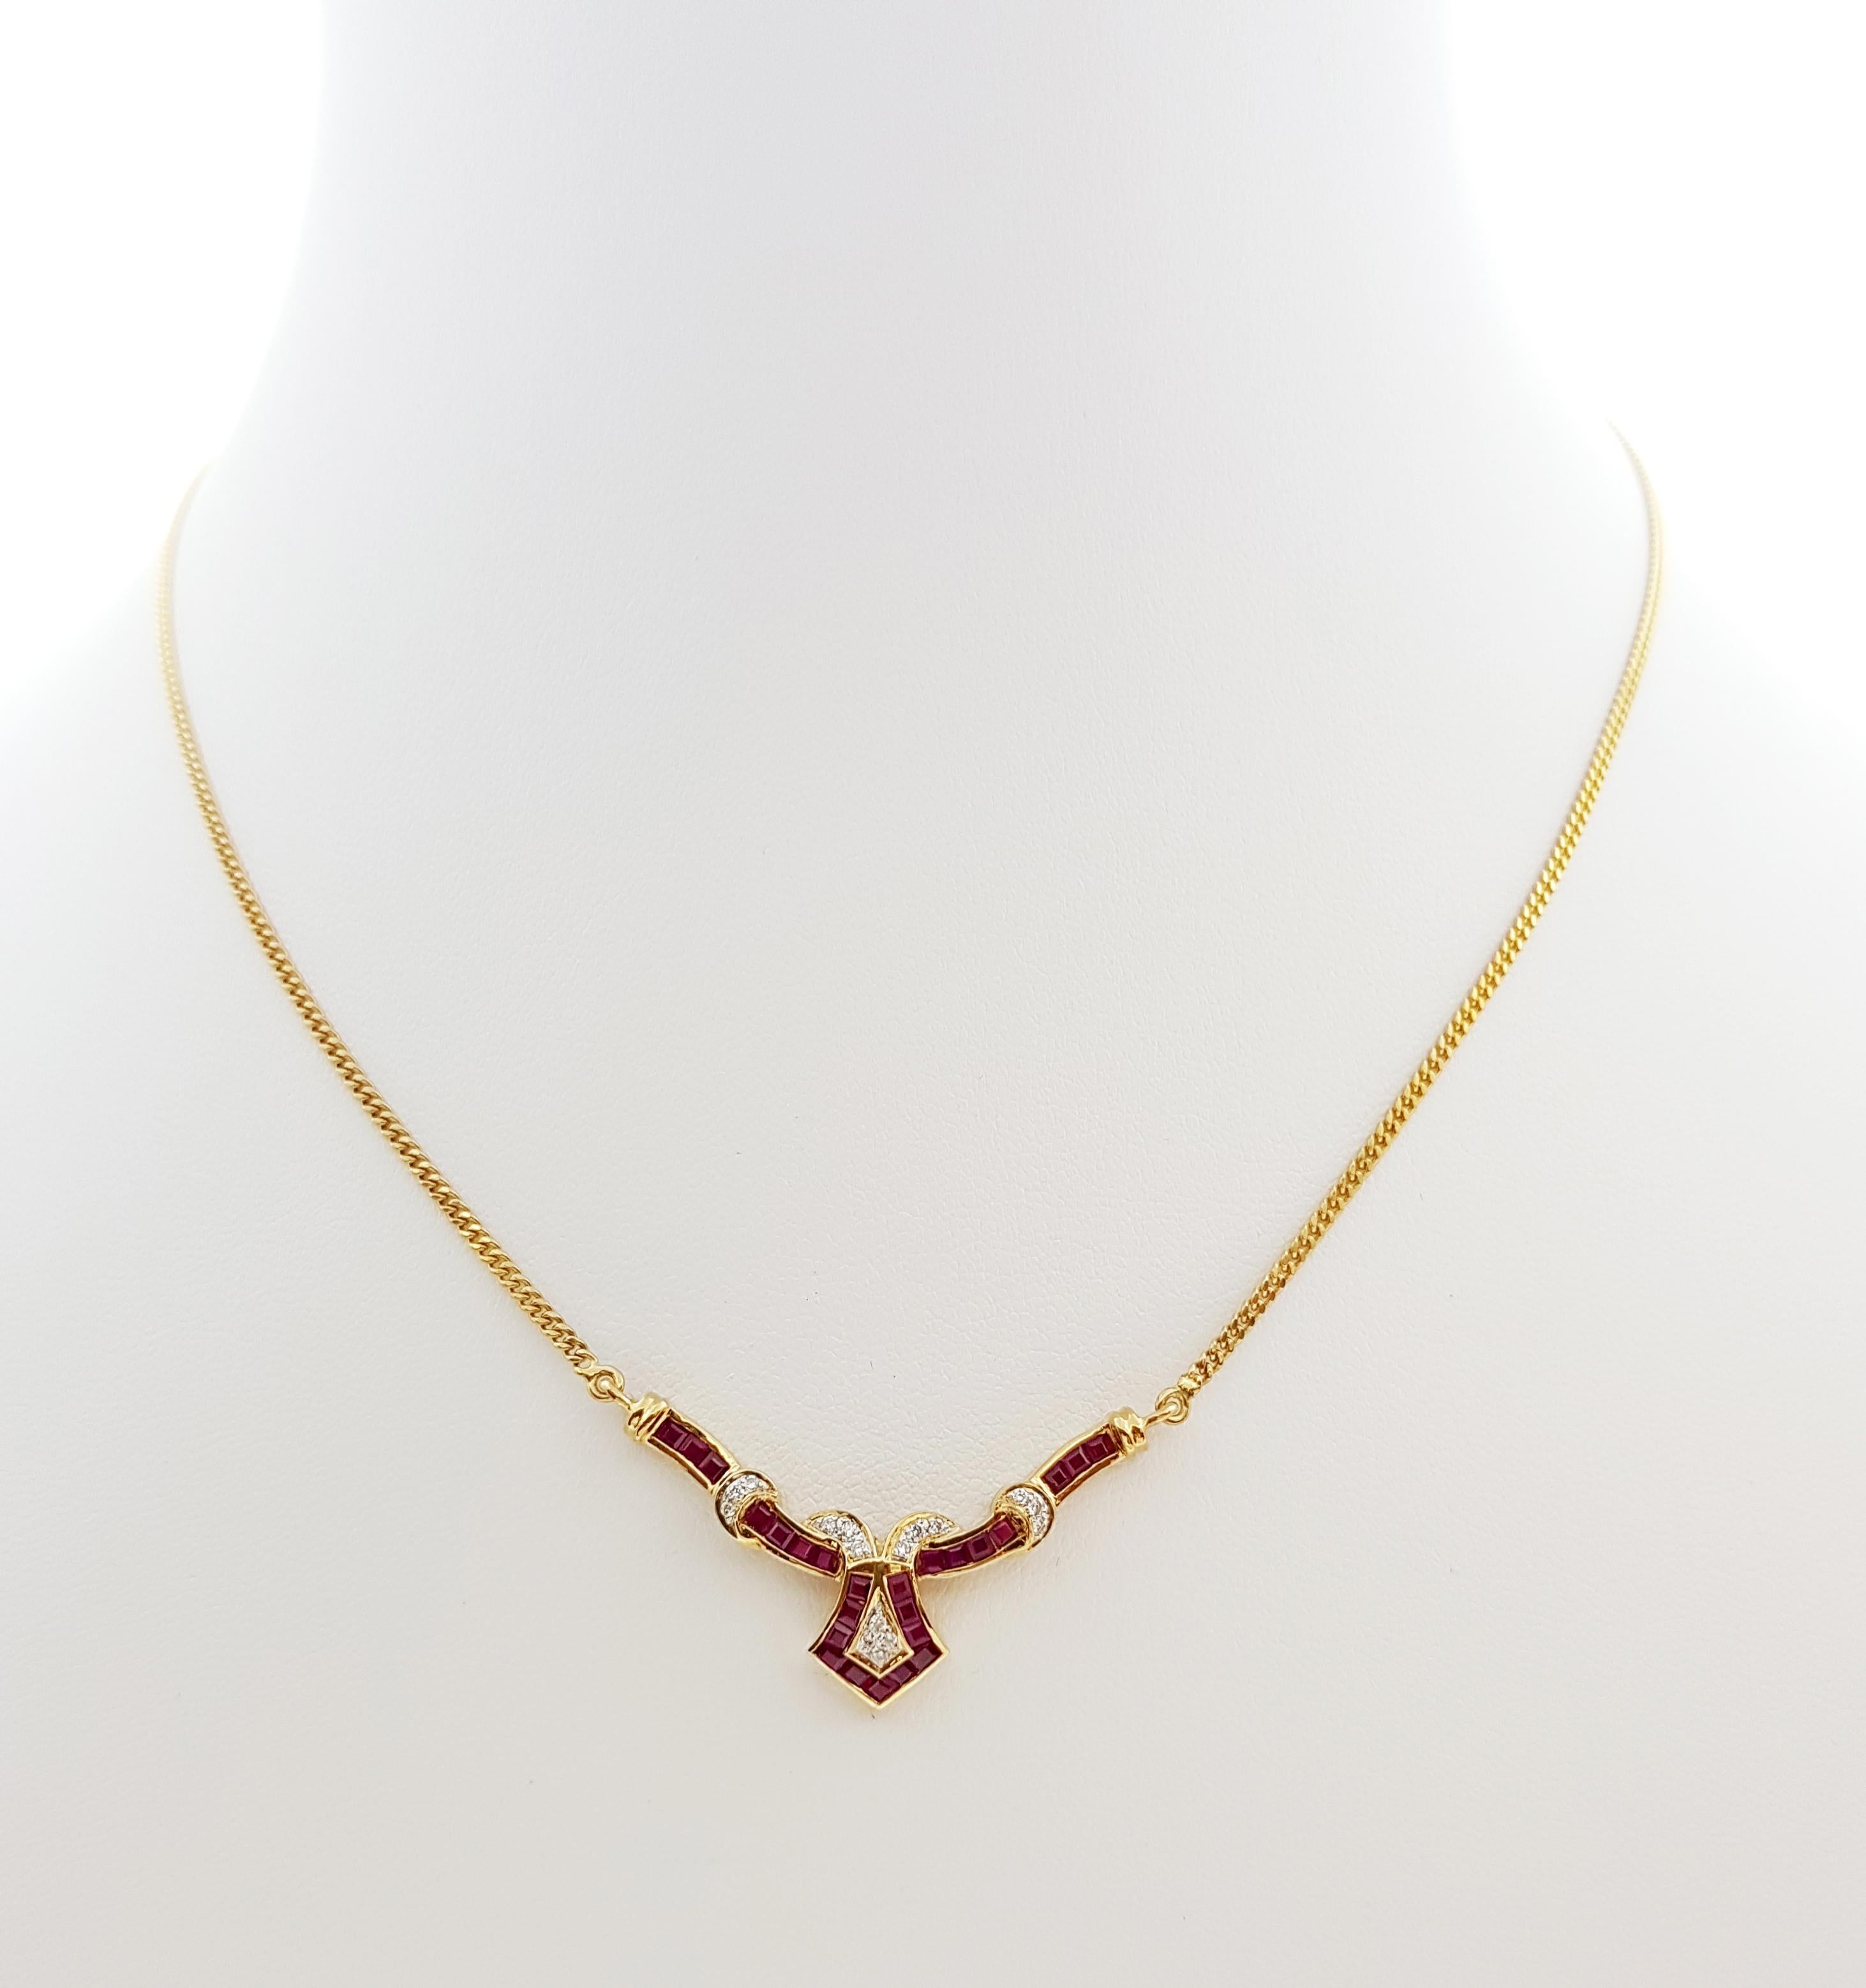 Ruby 1.15 carats with Diamond 0.16 carat Necklace set in 18 Karat Gold Settings

Width: 2.0 cm 
Length: 44.5 cm
Total Weight: 8.98 grams

